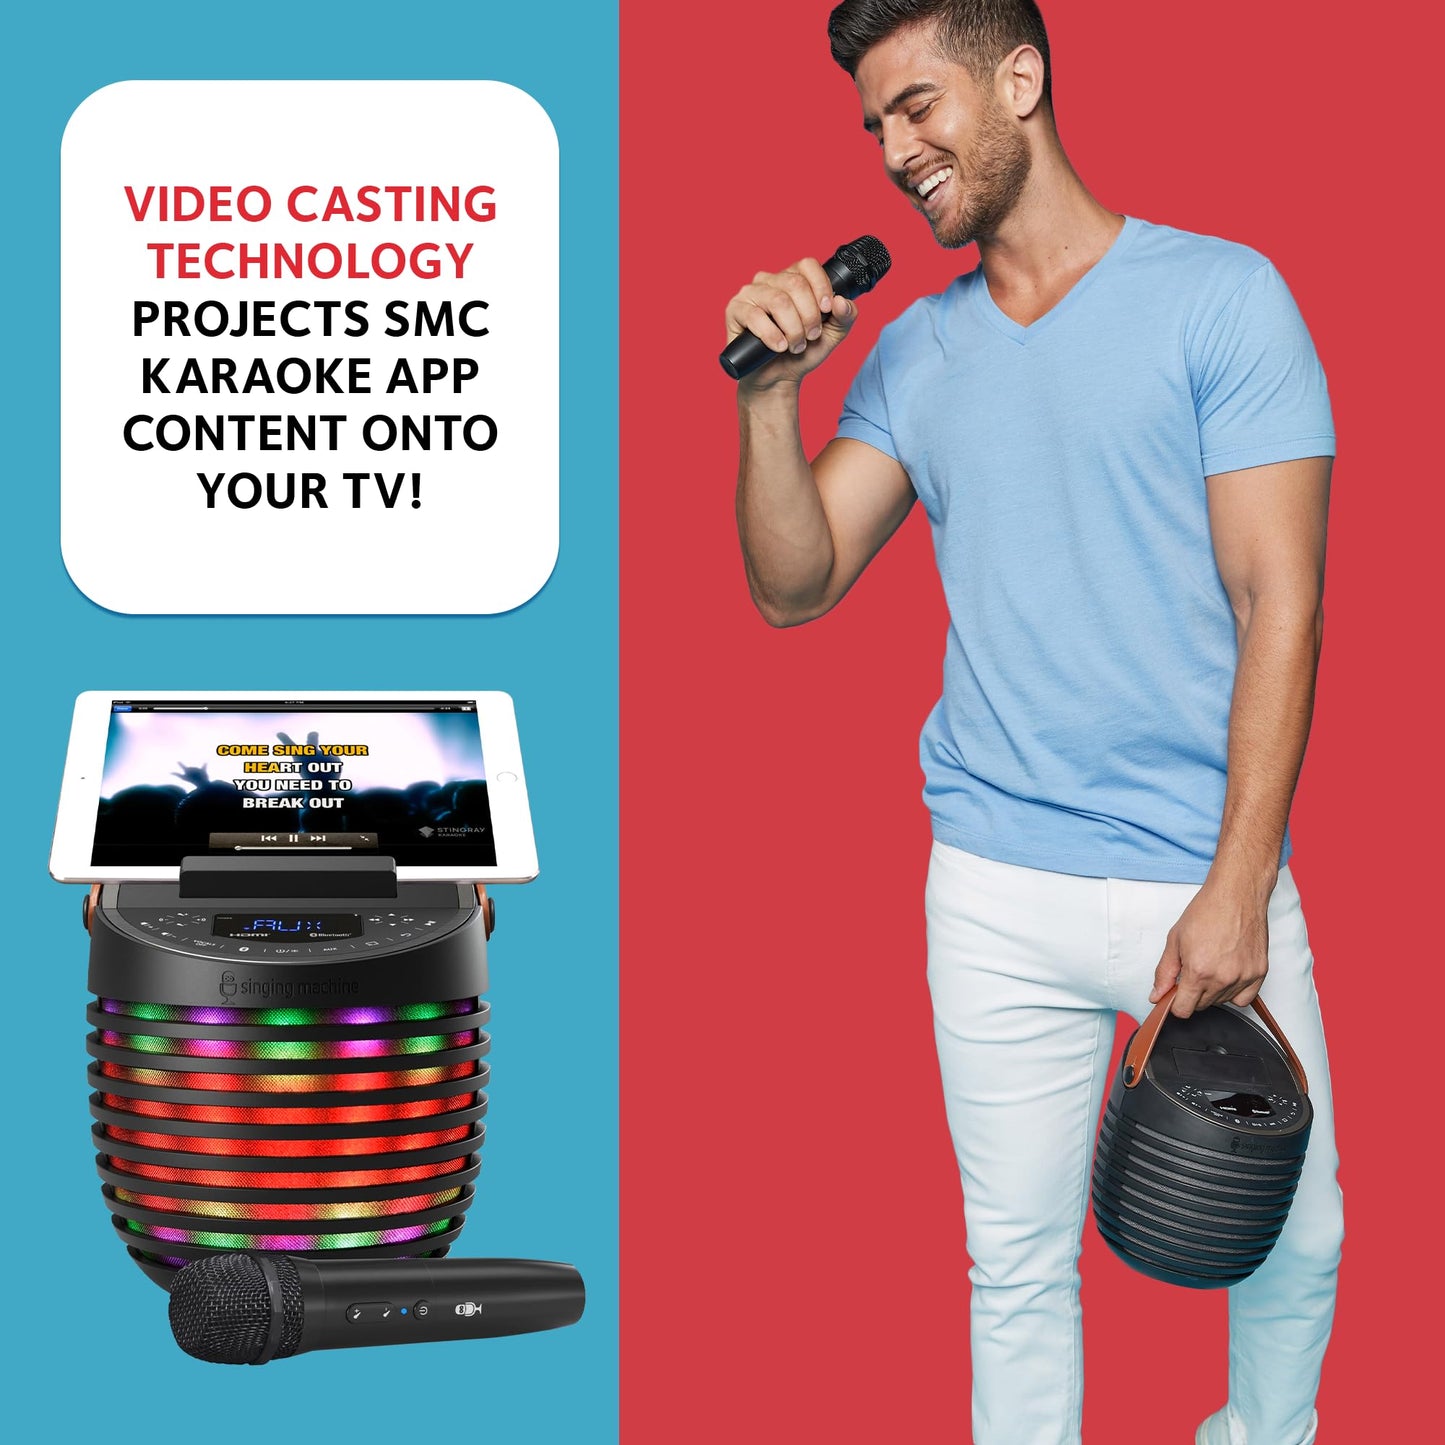 Singing Machine Karaoke Machine for Adults & Kids with Wireless Microphone, SingCast One - Karaoke Speaker with Video Casting Technology, Karaoke System with Bluetooth & Voice Changing Effect